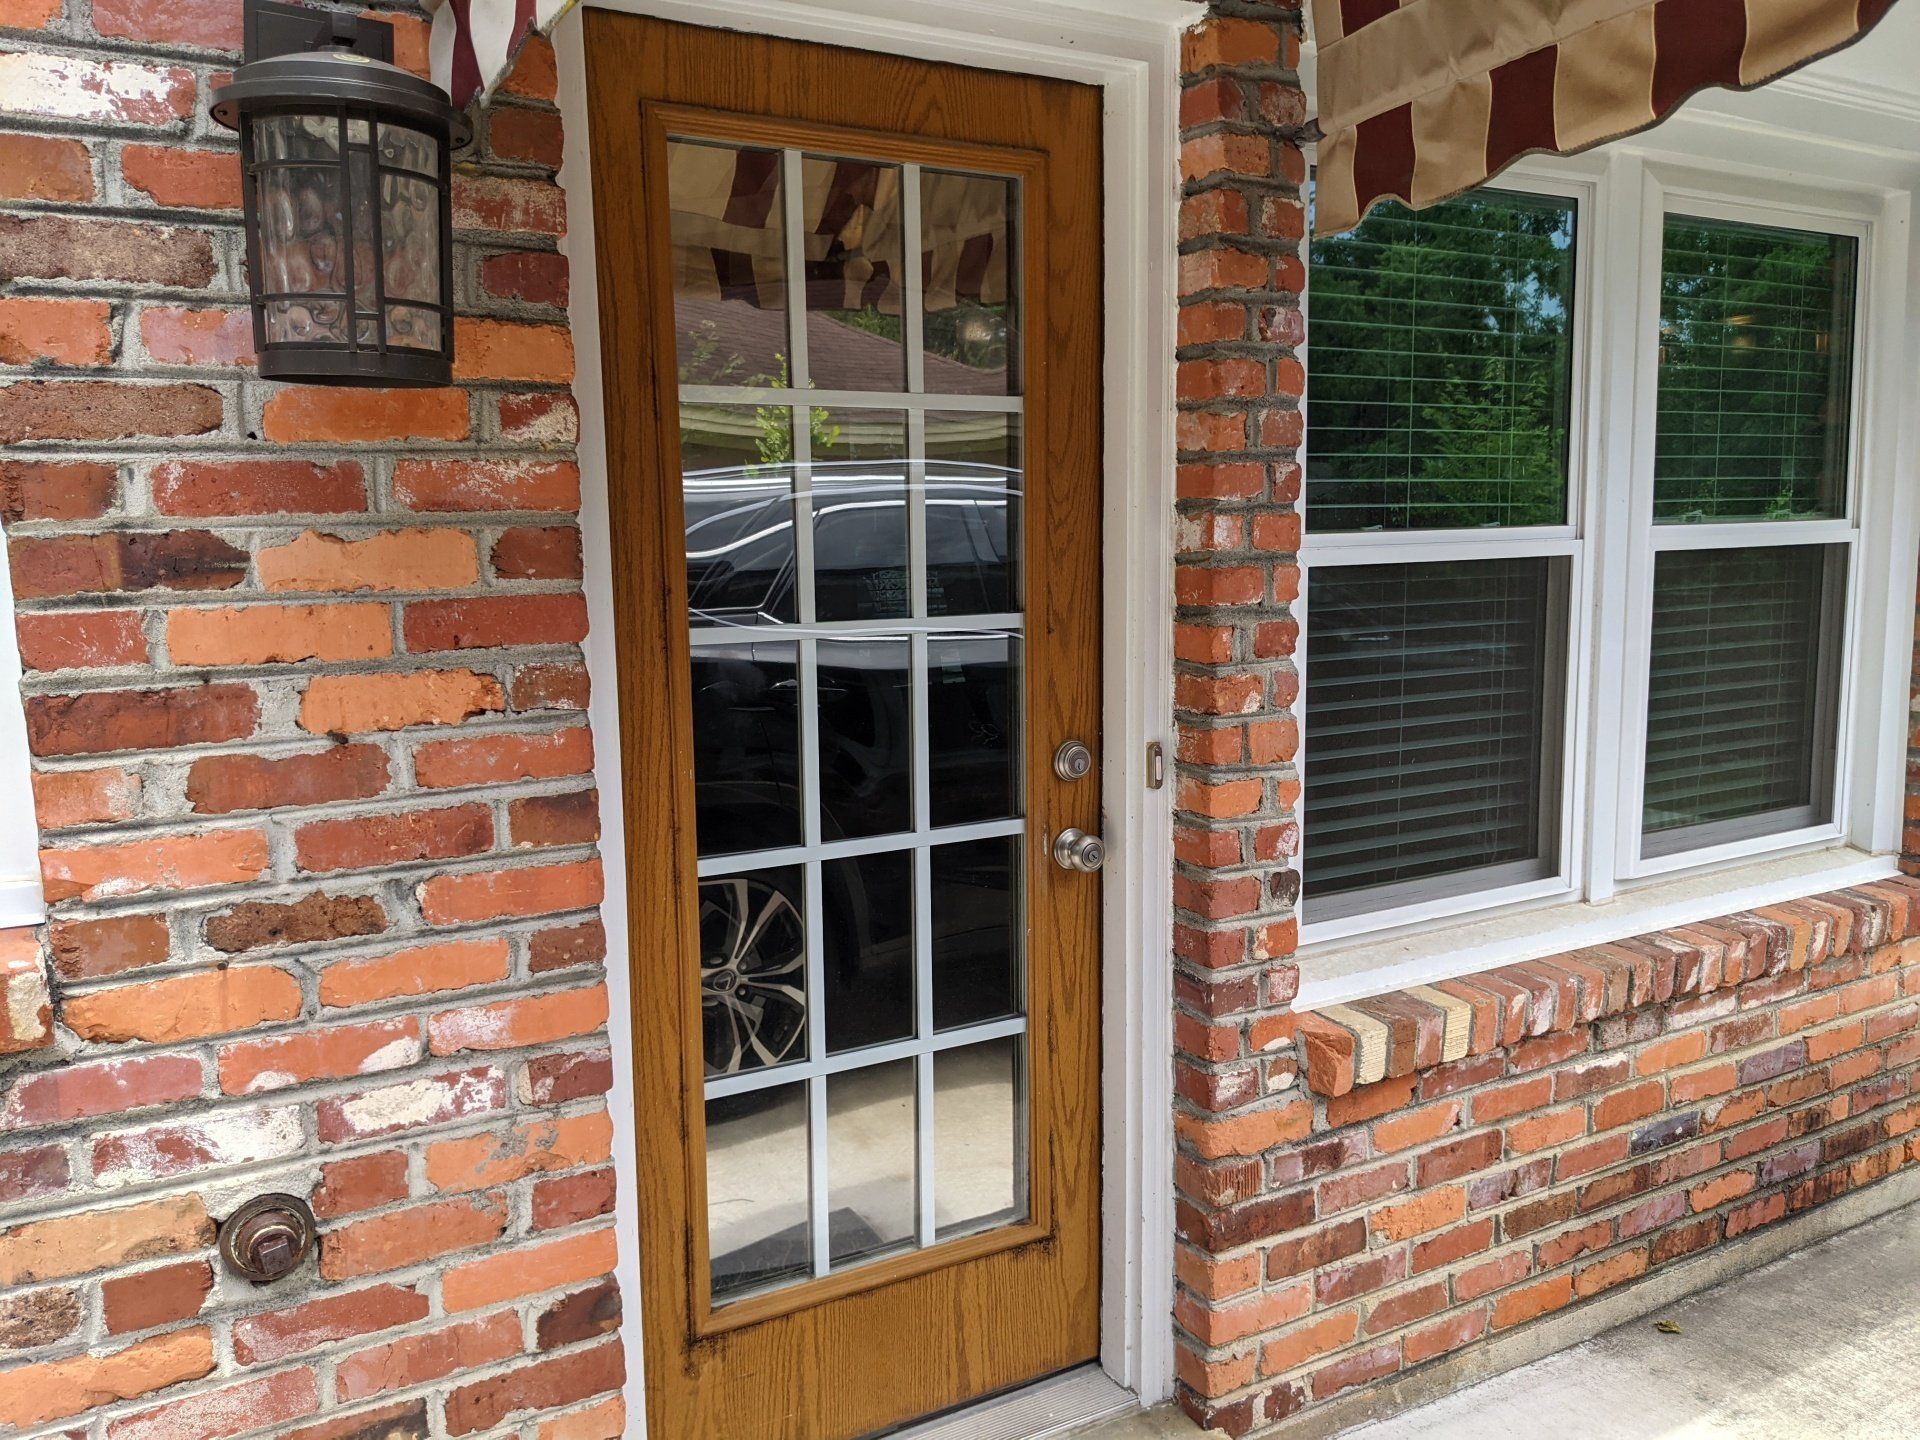 home window tinting in Montgomery AL - One-Way Privacy and Maximum Heat Rejection has been gained by SPF Ultra Performance Home Tint in Montgomery, AL